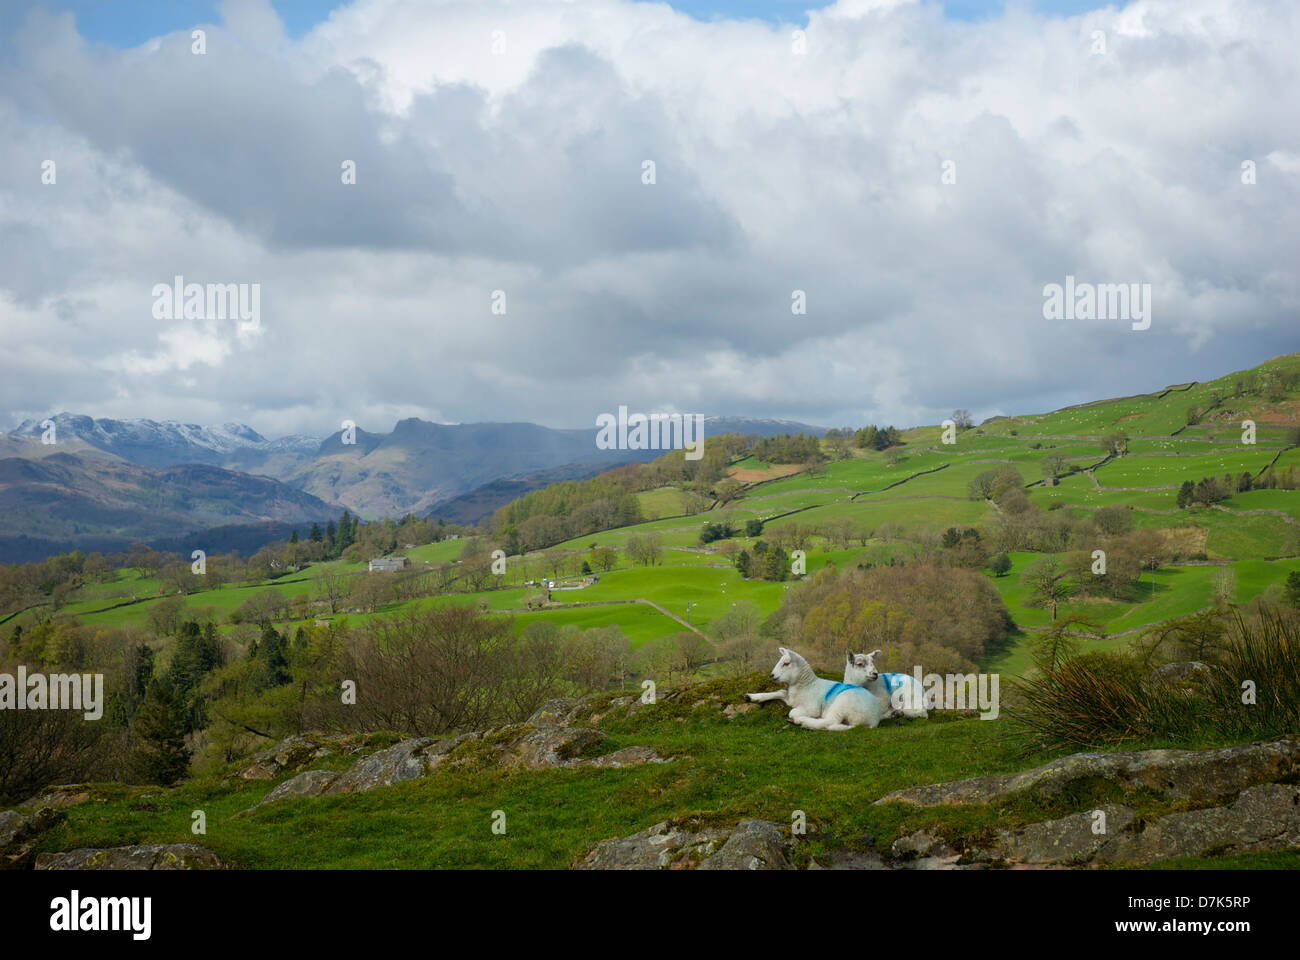 Lambs lying down on pasture, overlooking the Troutbeck Valley and Langdale Pikes, Lake District Nat Park, Cumbria, England UK Stock Photo